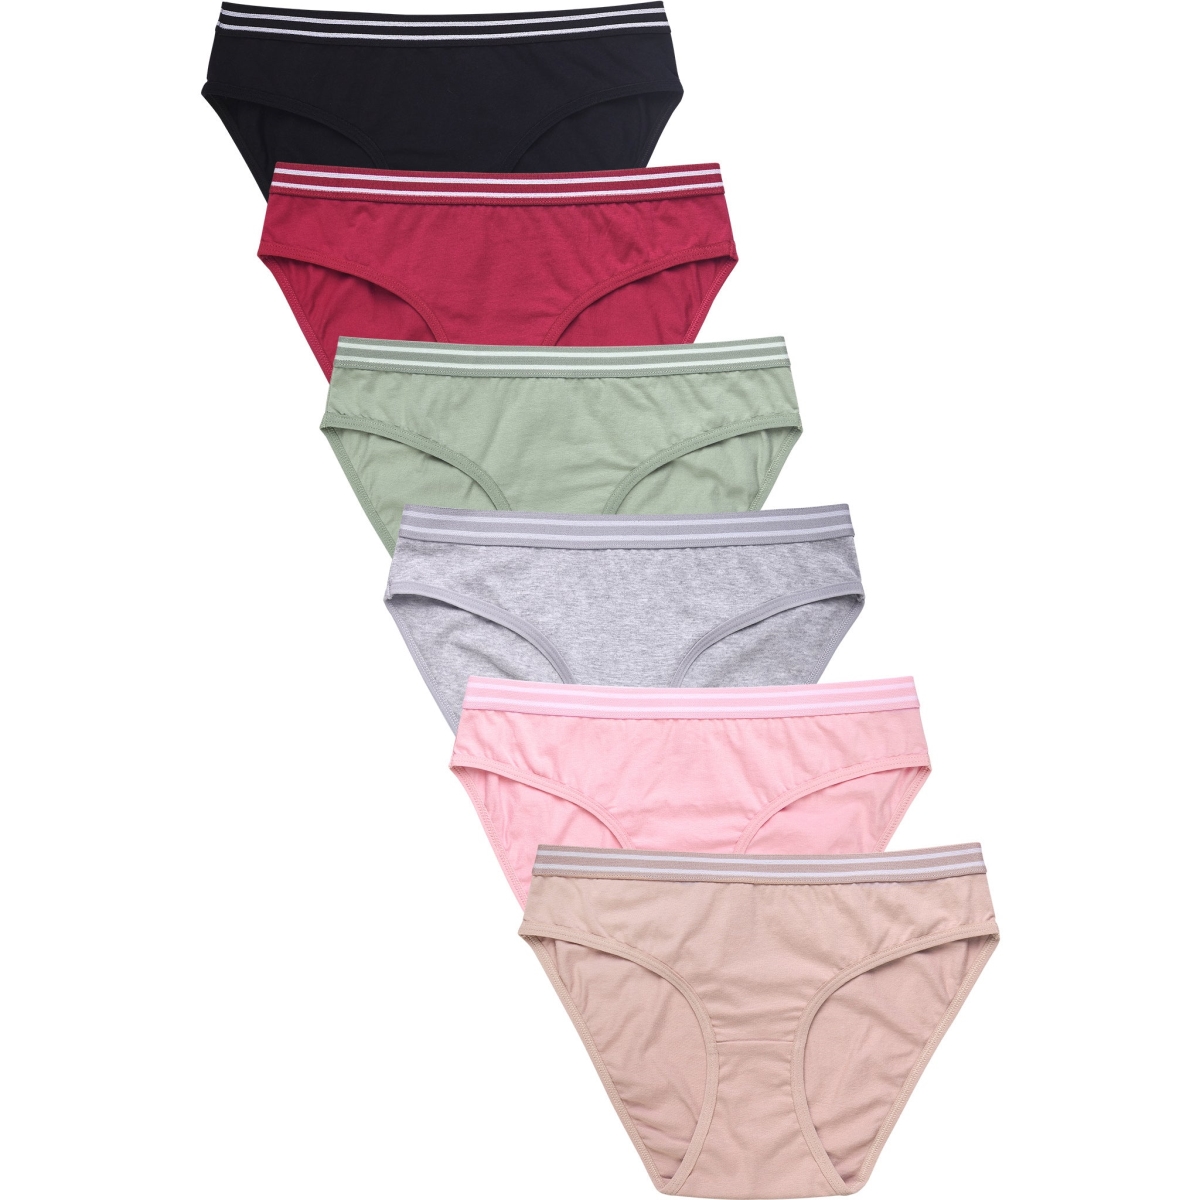 Picture of 247 Frenzy 247-LP1361CK4-MD Sofra Womens Essentials Cotton Stretch Bikini Panty Underwear - Assorted Color - Medium - Pack of 6